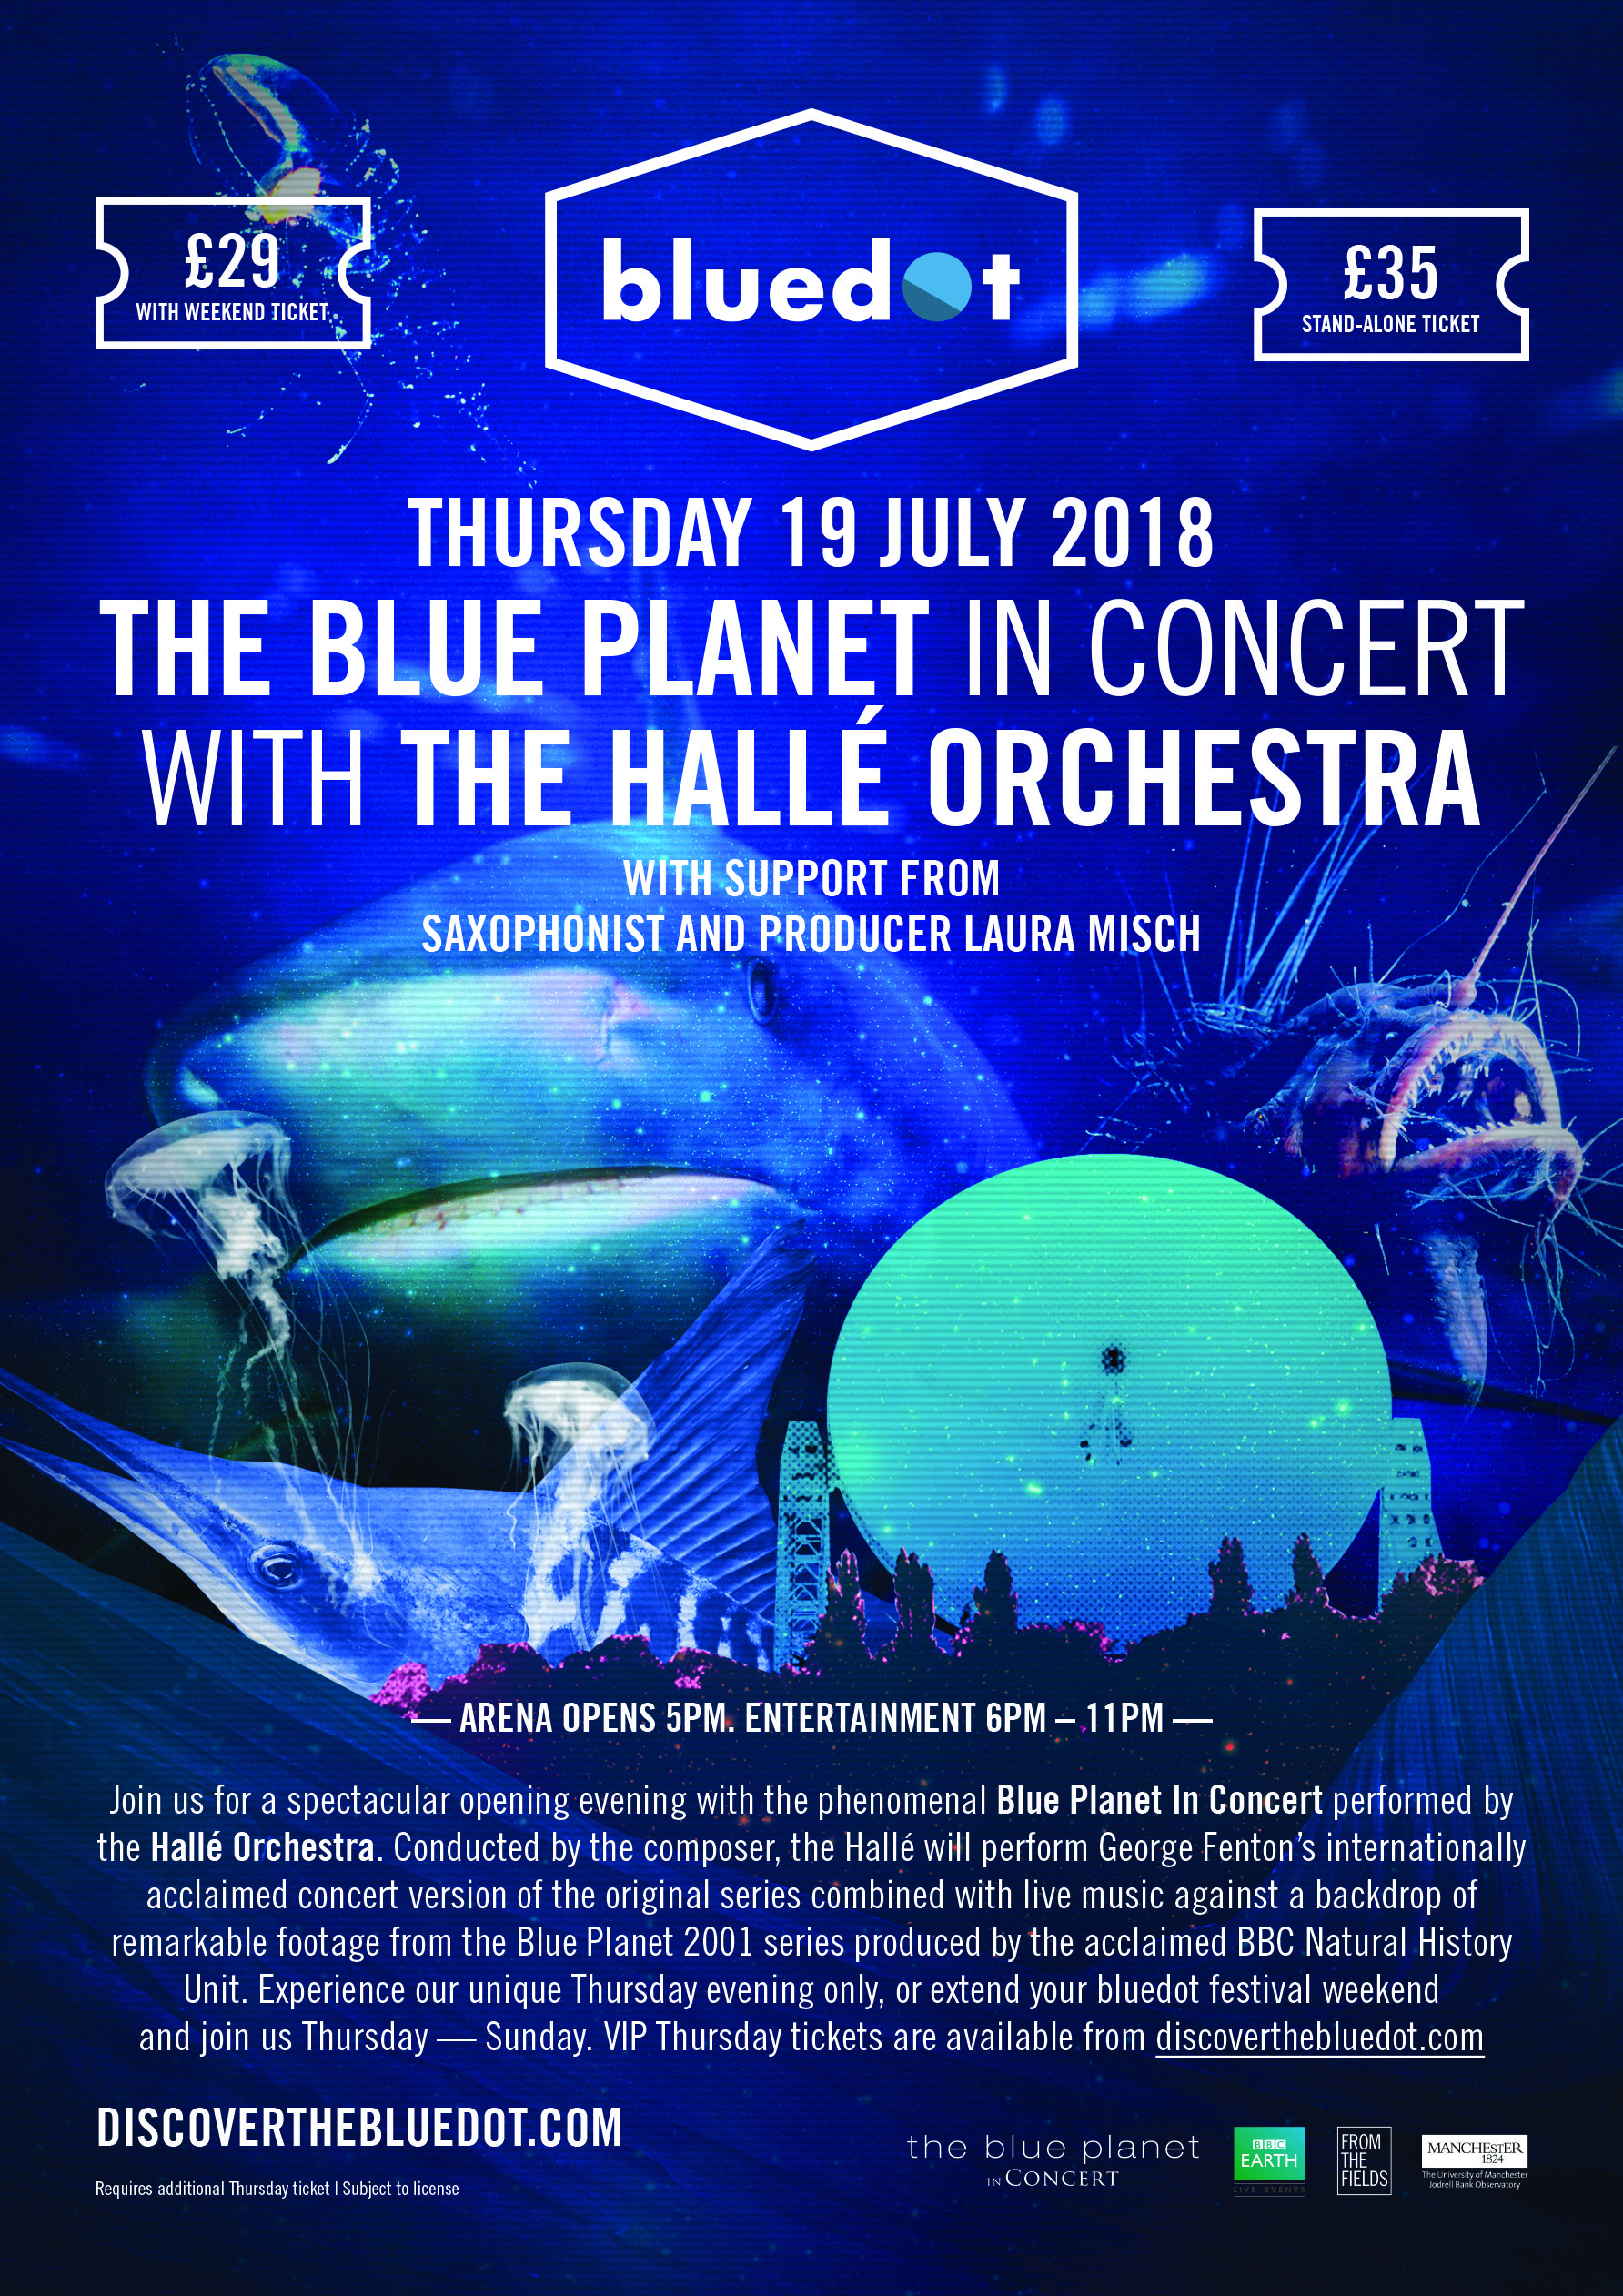 The Blue Planet In Concert With The Hallé Orchestra At Bluedot